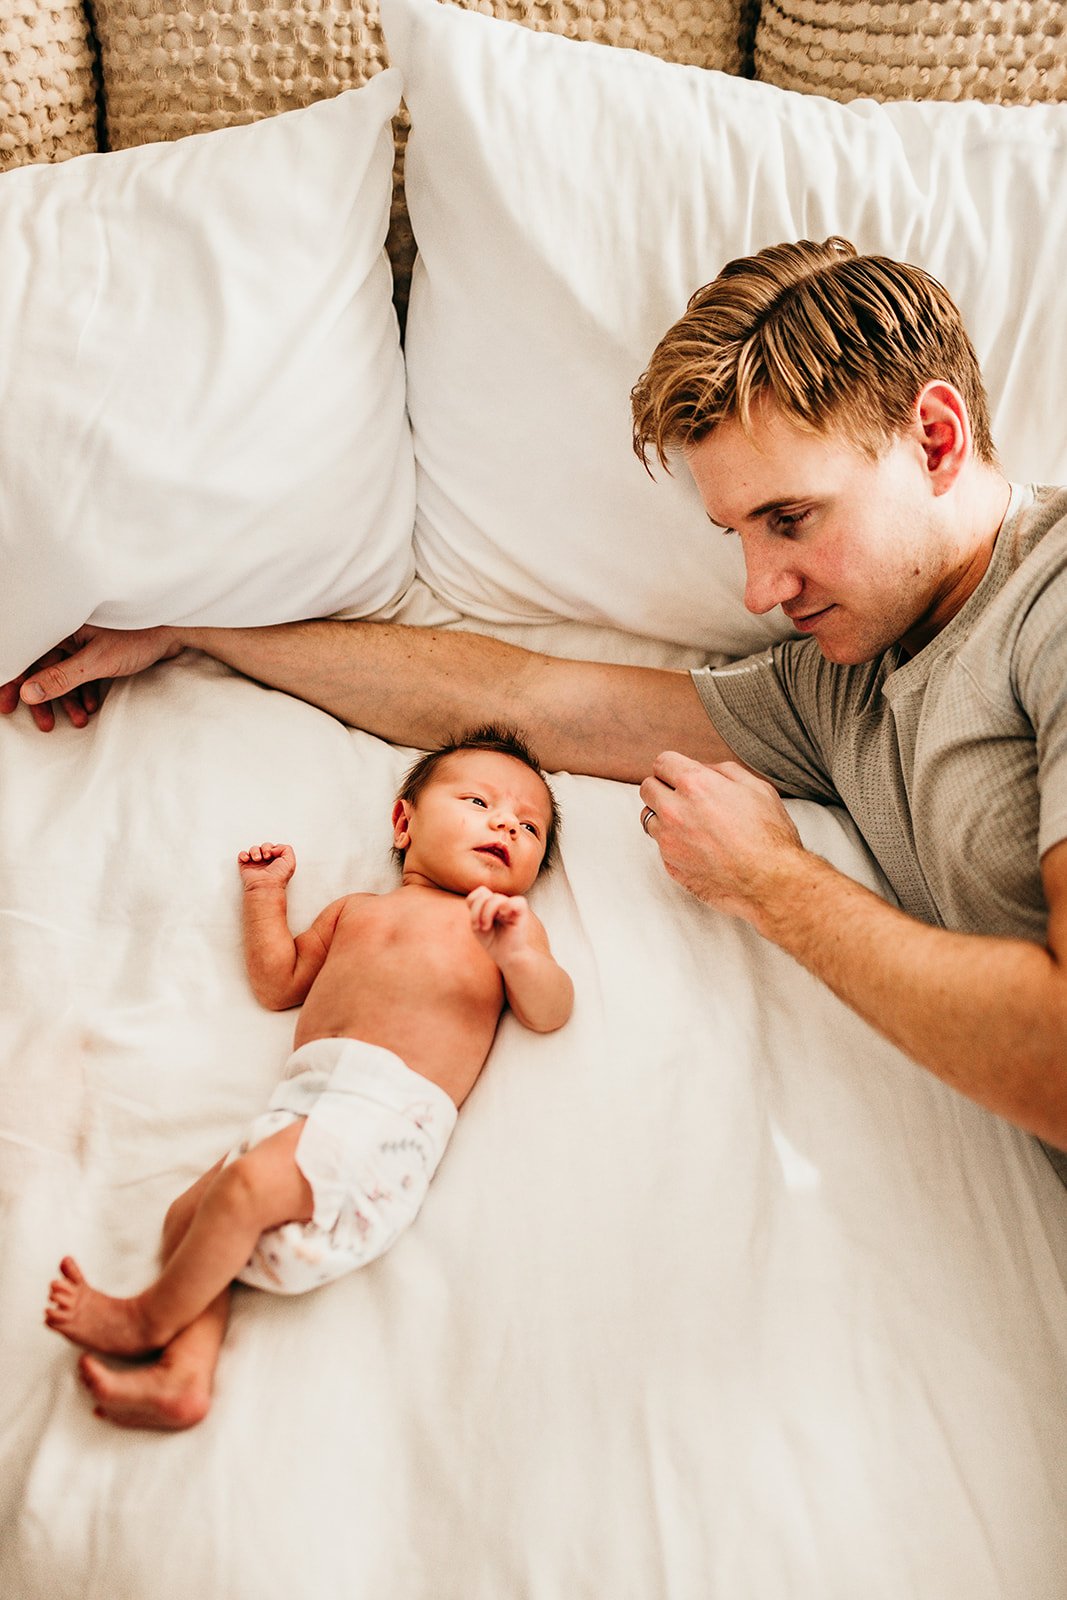 father-playing-with-baby-on-bed.jpg